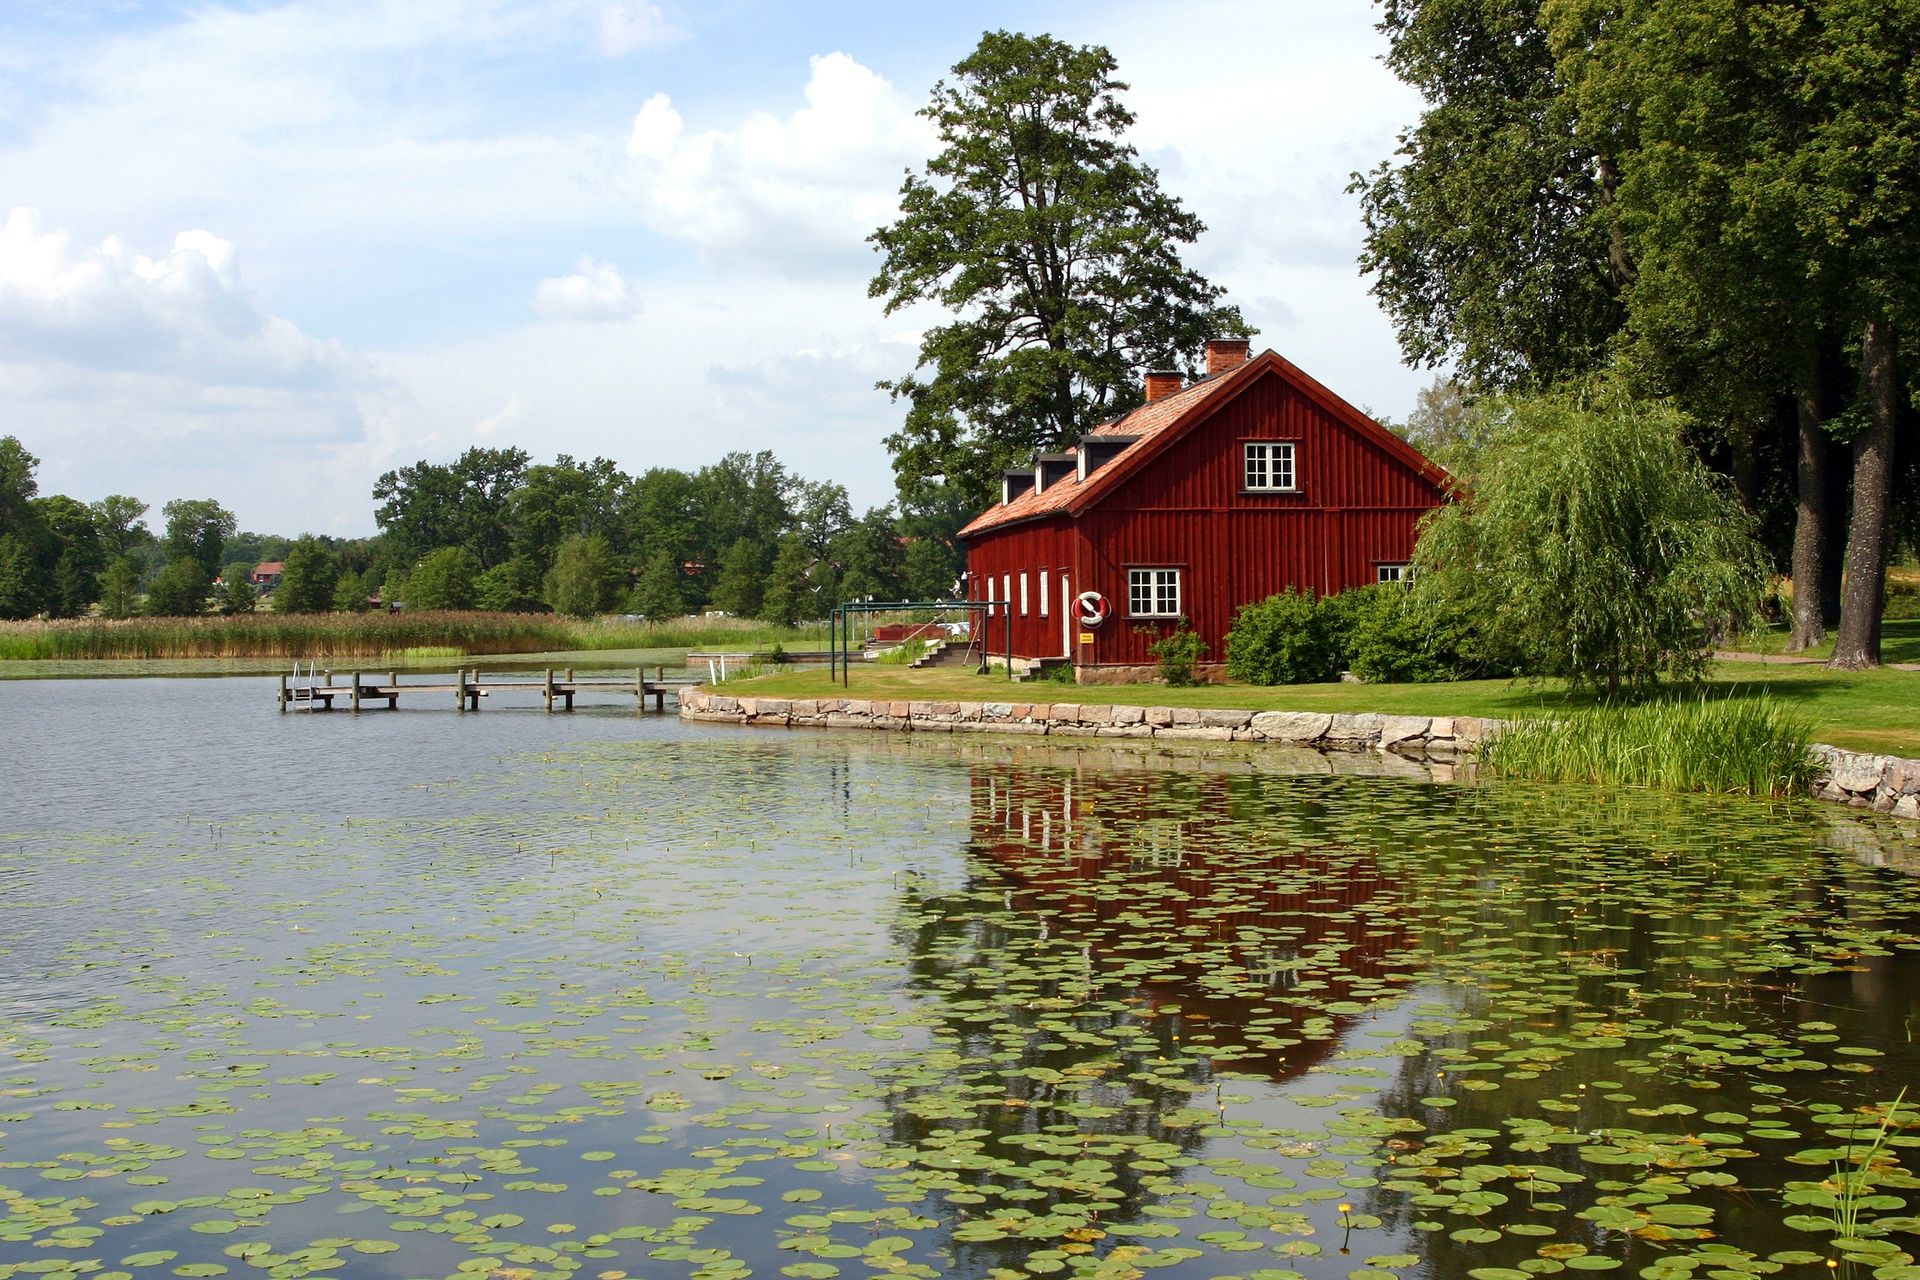 A red house in Sweden sits by a small lake filled with lily pads.